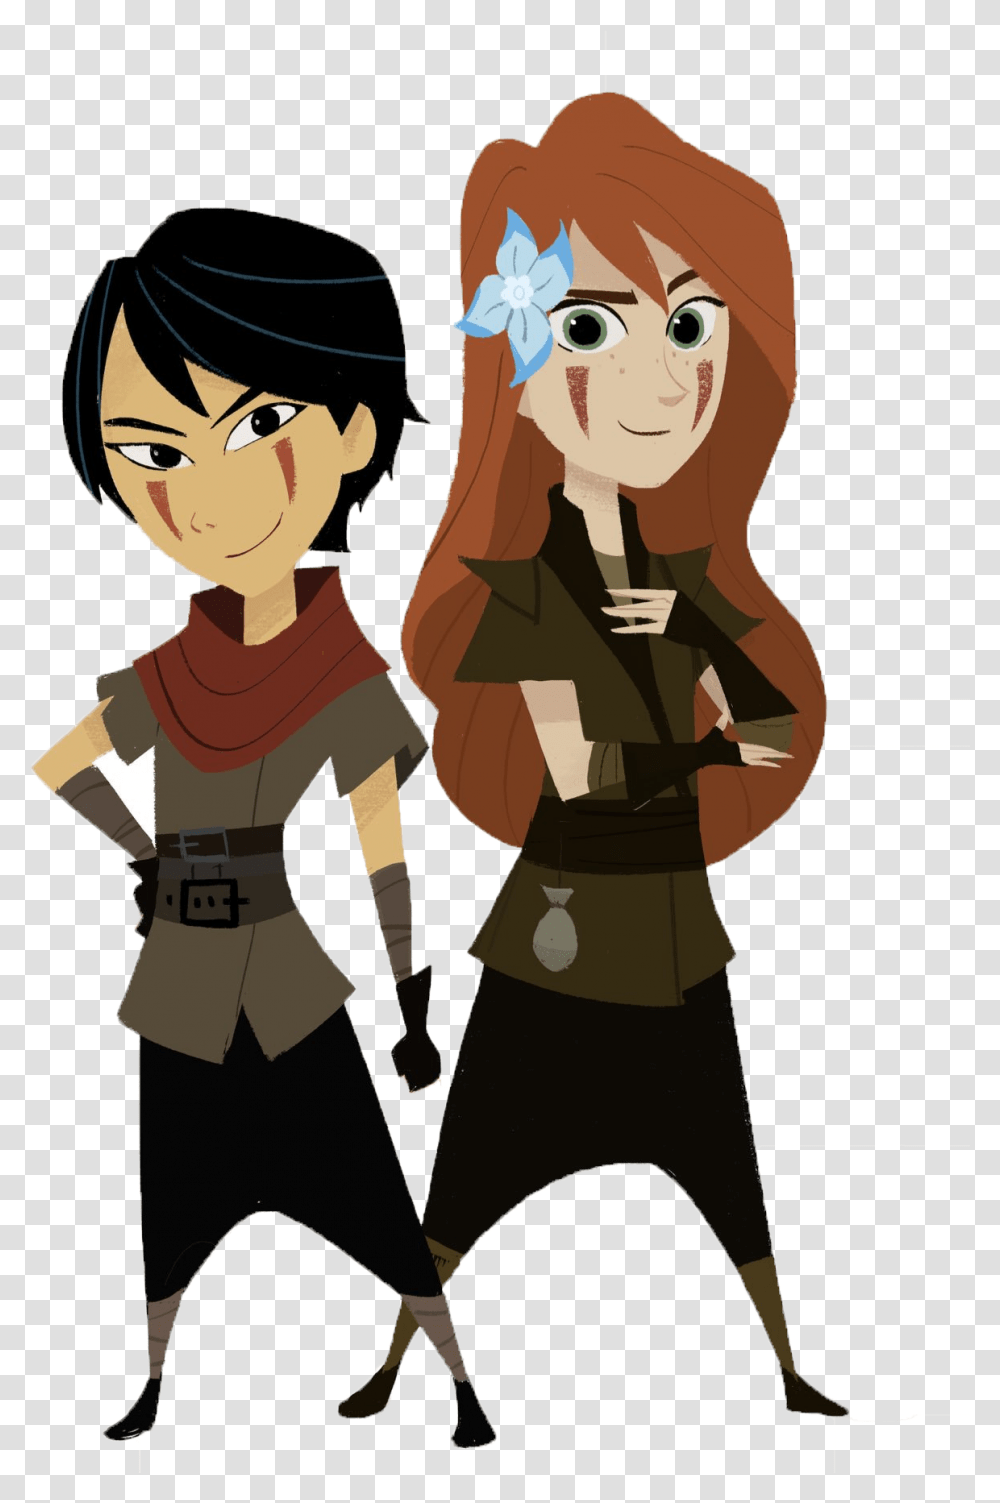 S Tangled Adventure Wiki Tangled The Series Red And Angry, Book, Manga, Comics Transparent Png